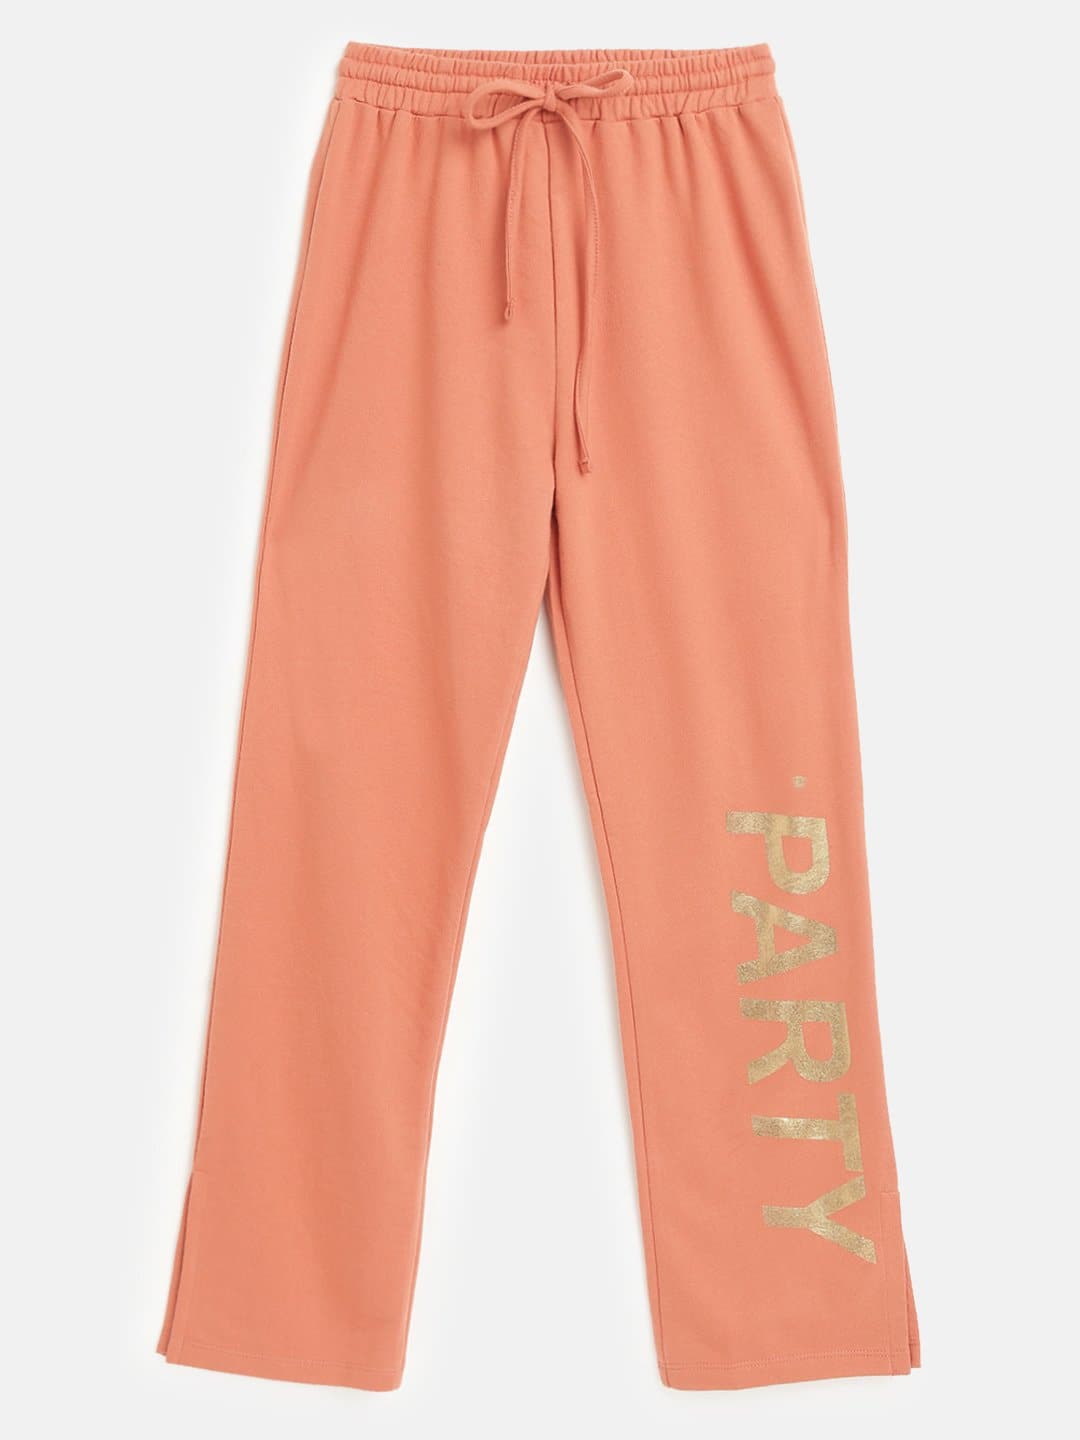 Buy Girls Coral Party Print Track Pants Online at Sassafras